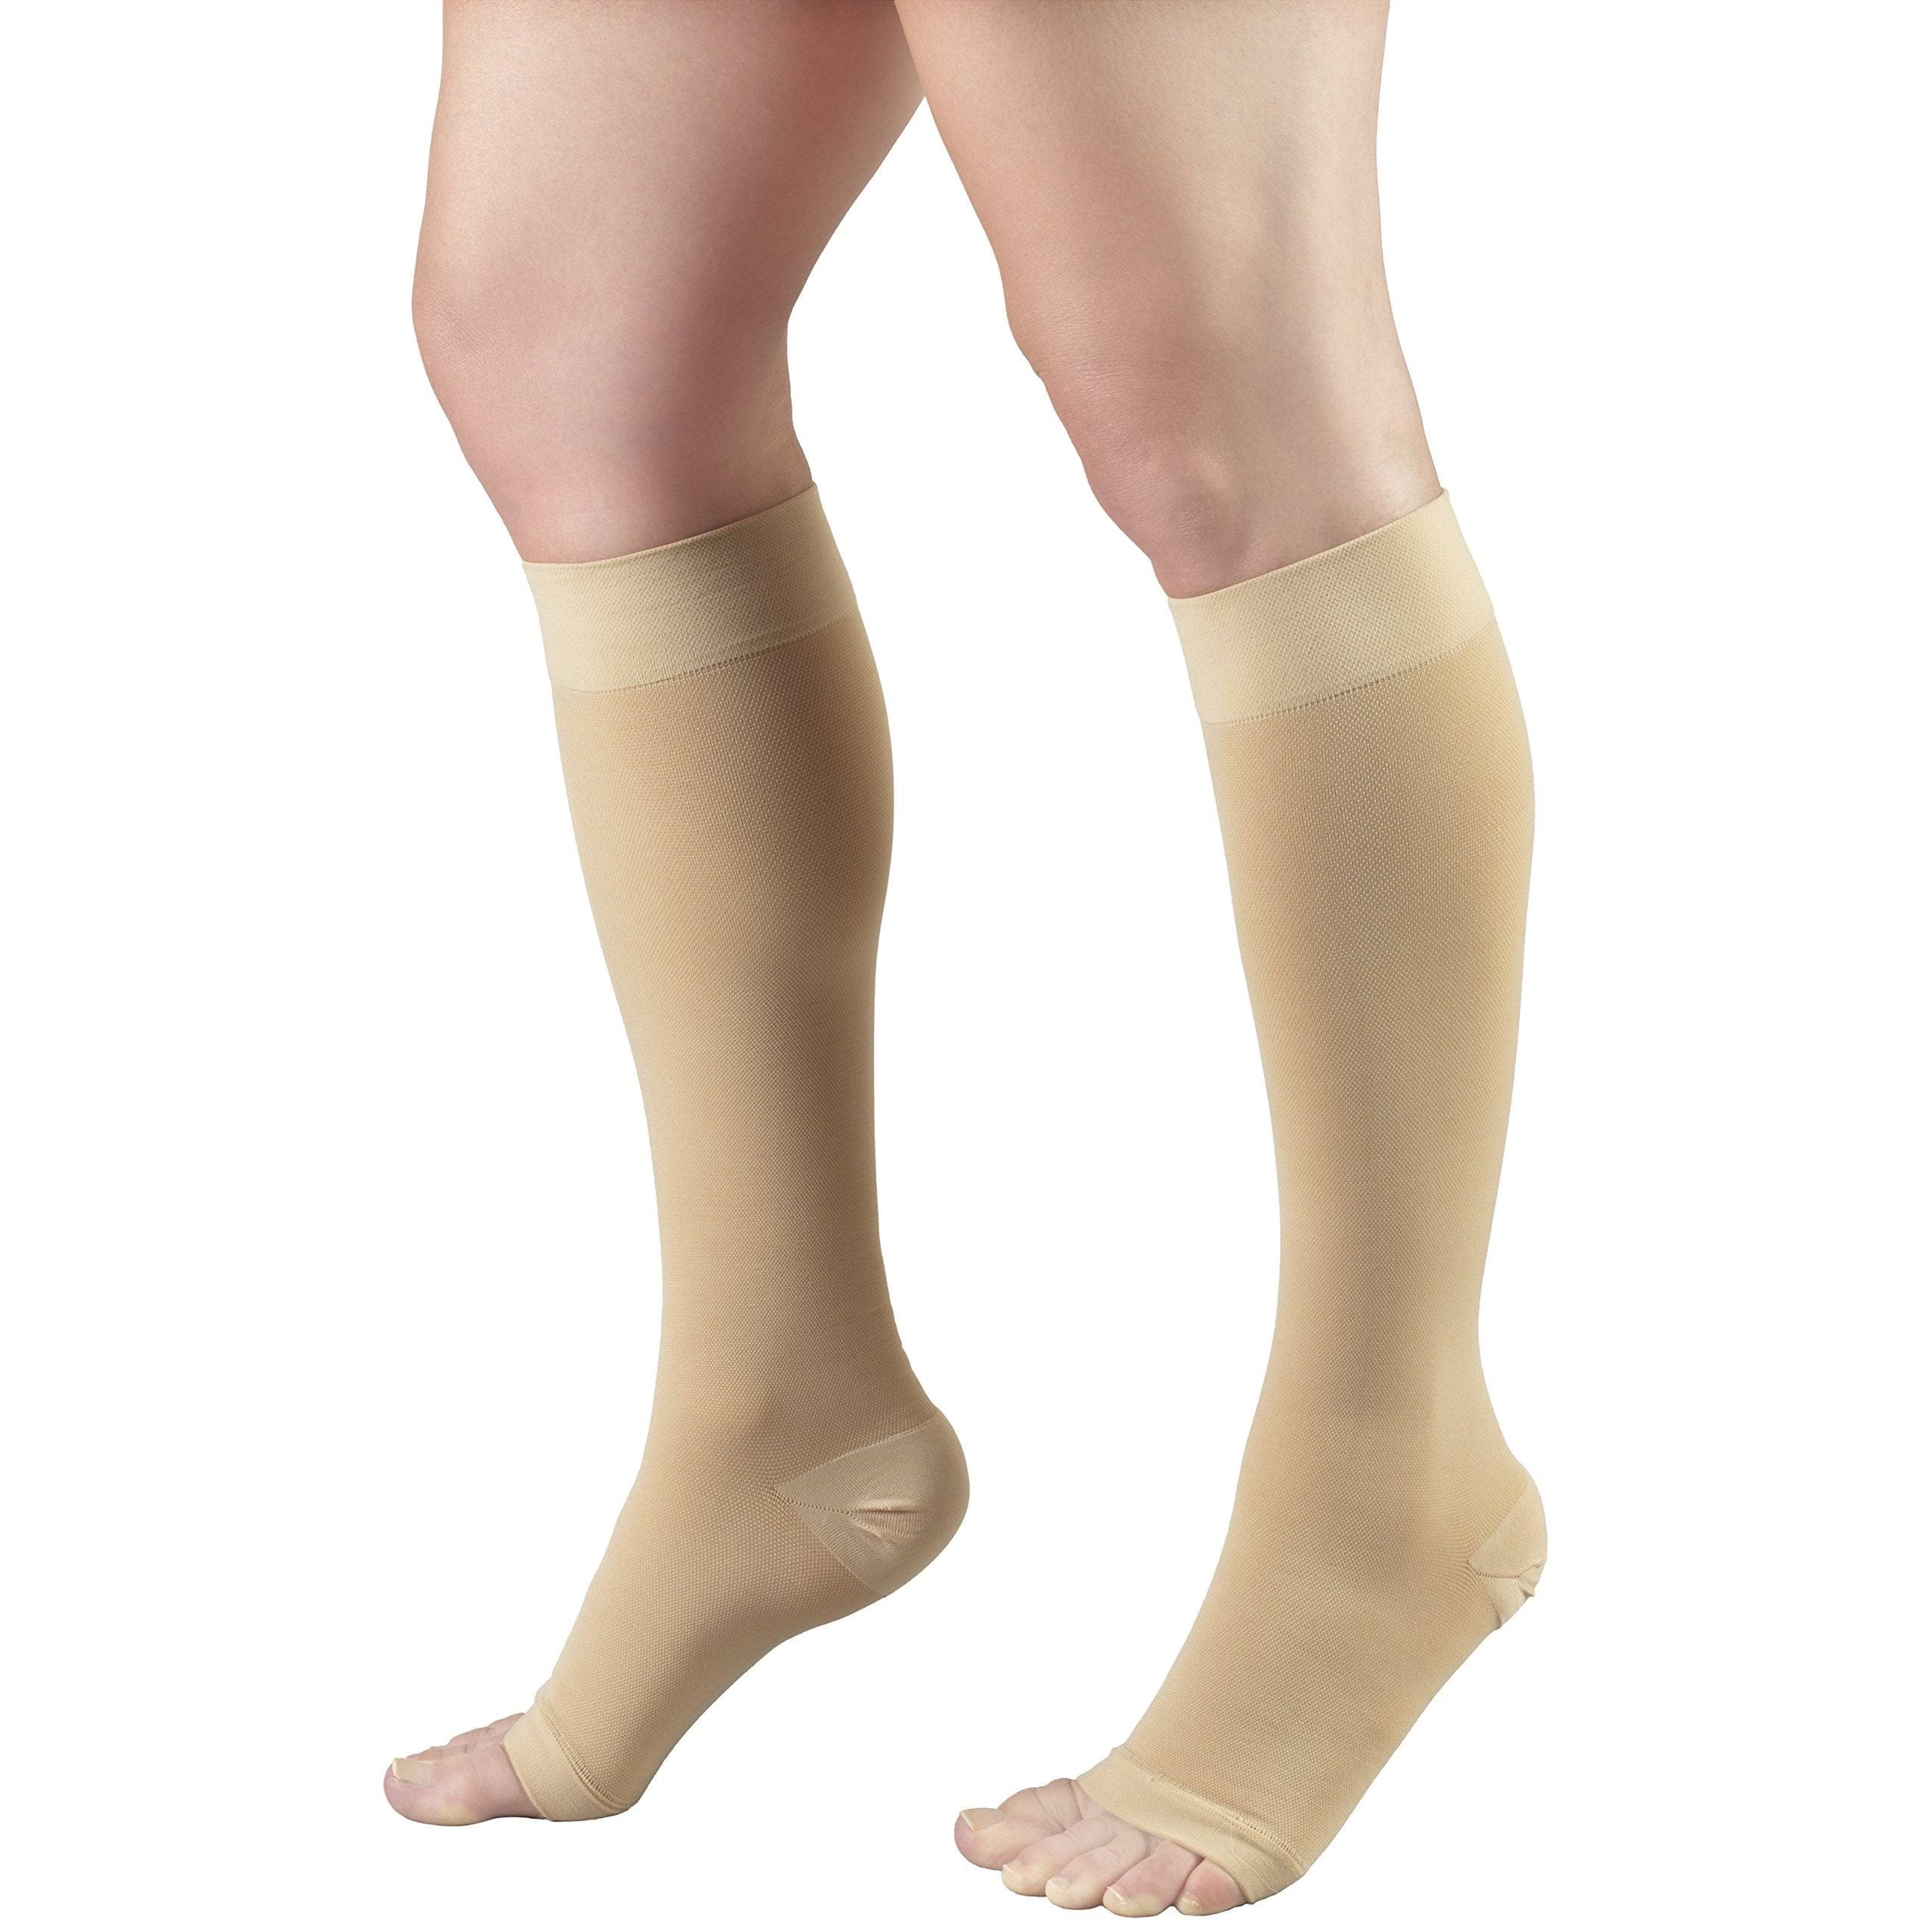 Truform Open Toe Knee High Compression Stockings - Beige, Large, Short Length, 20 to 30mmHg